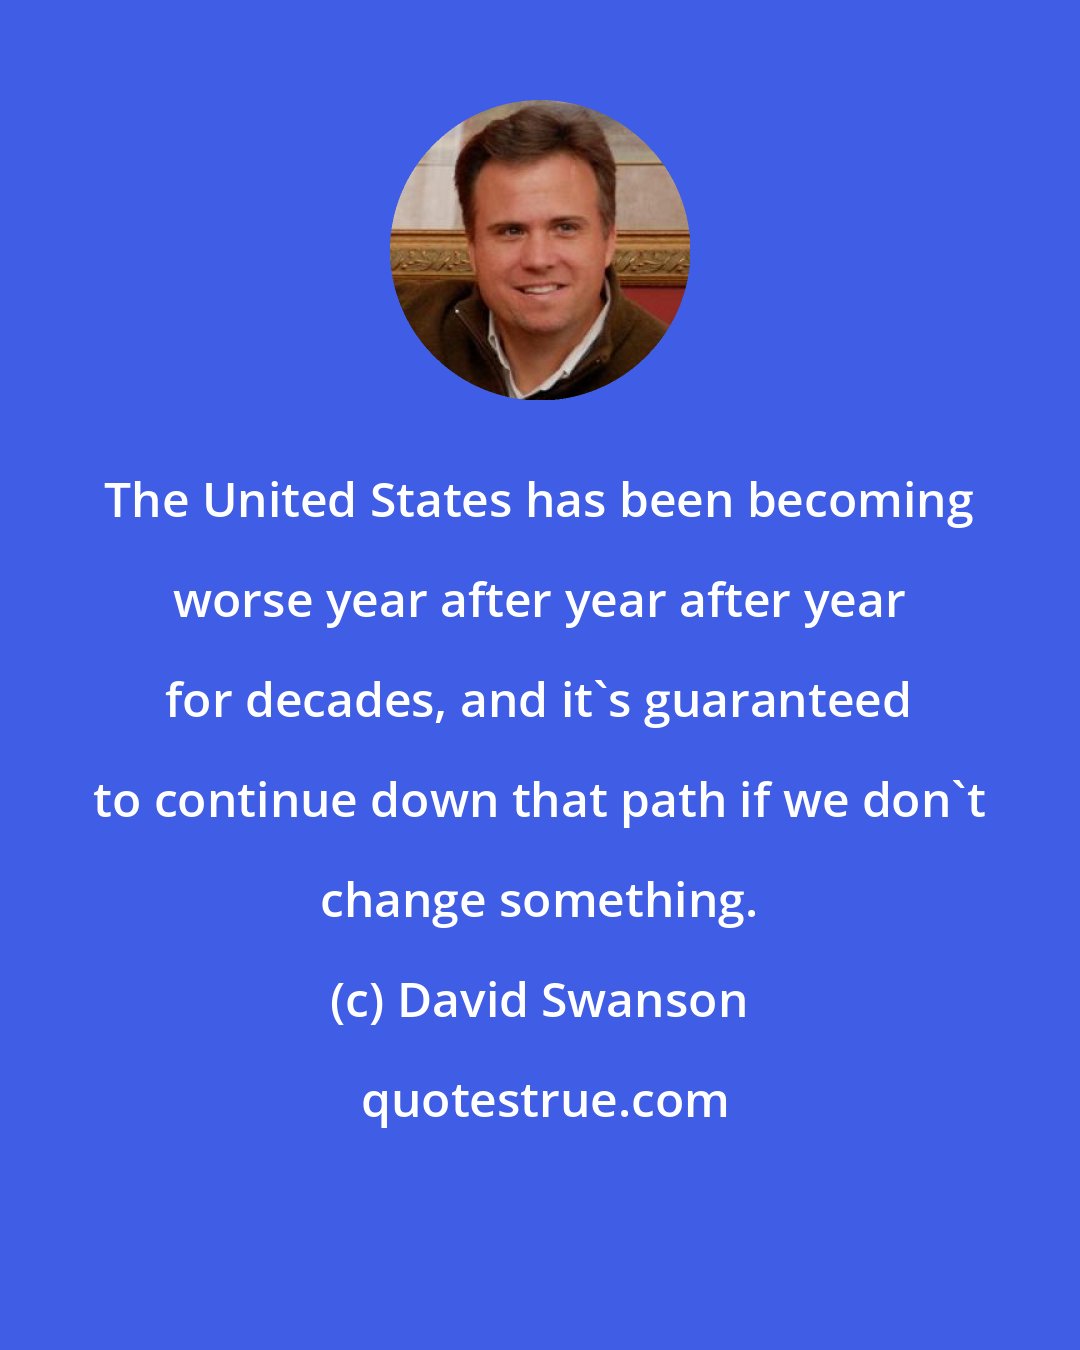 David Swanson: The United States has been becoming worse year after year after year for decades, and it's guaranteed to continue down that path if we don't change something.